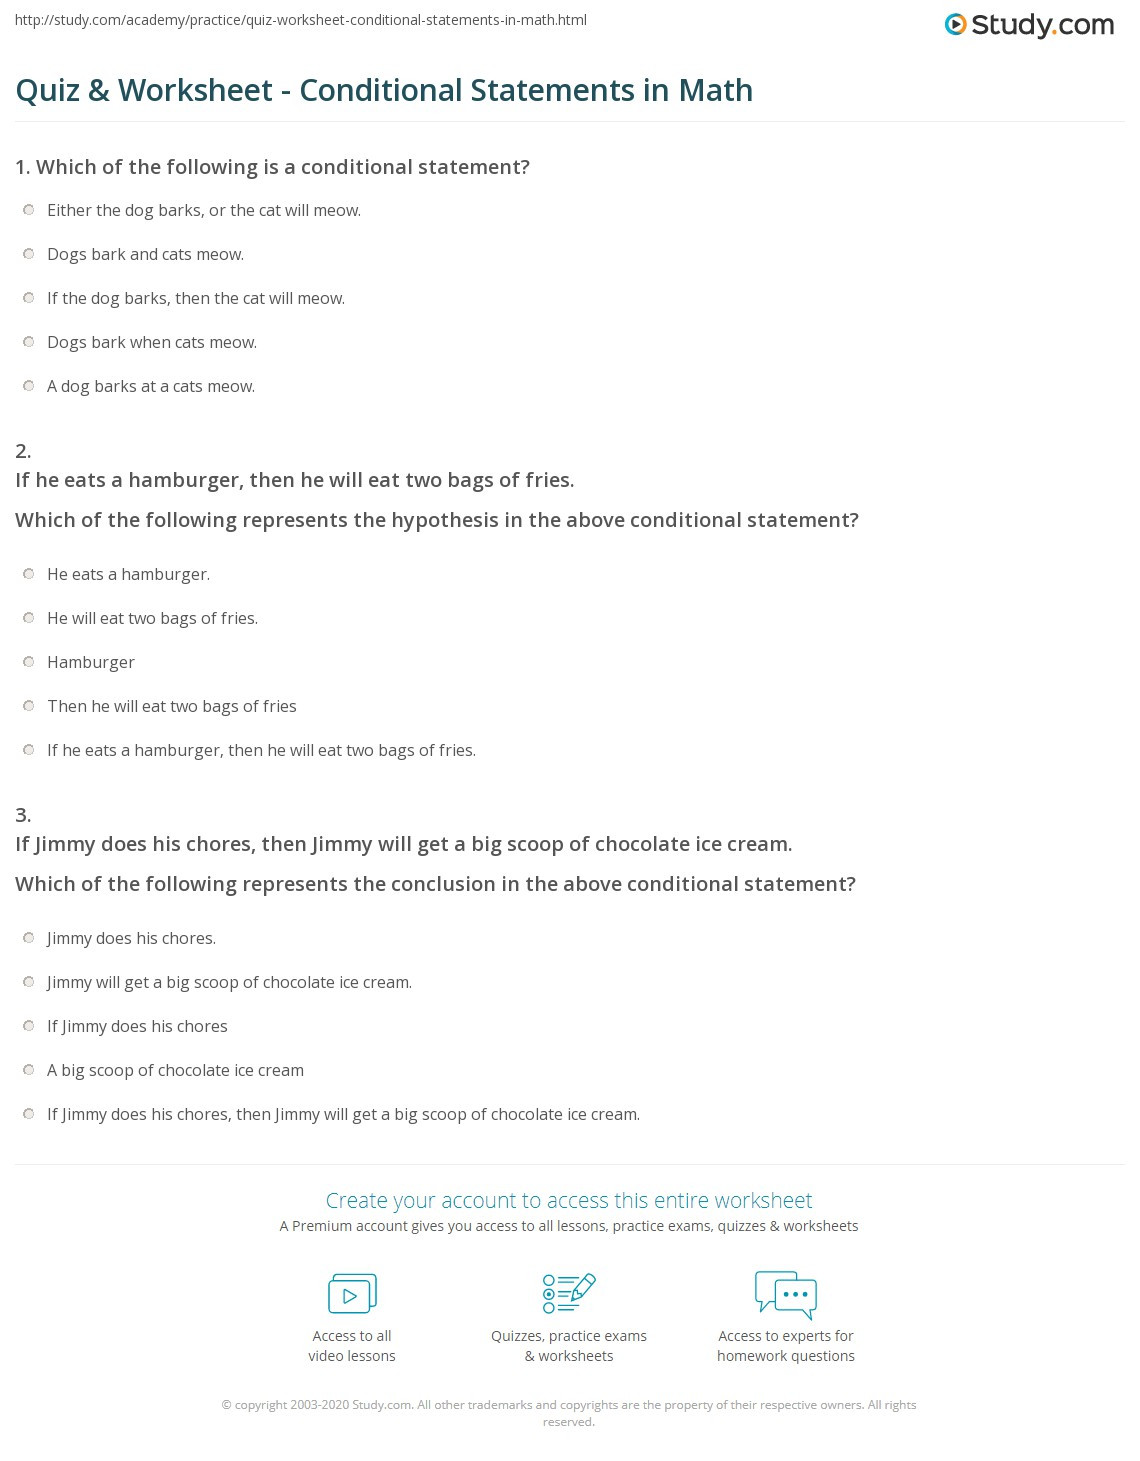 Conditional Statements Worksheet with Answers Quiz &amp; Worksheet Conditional Statements In Math